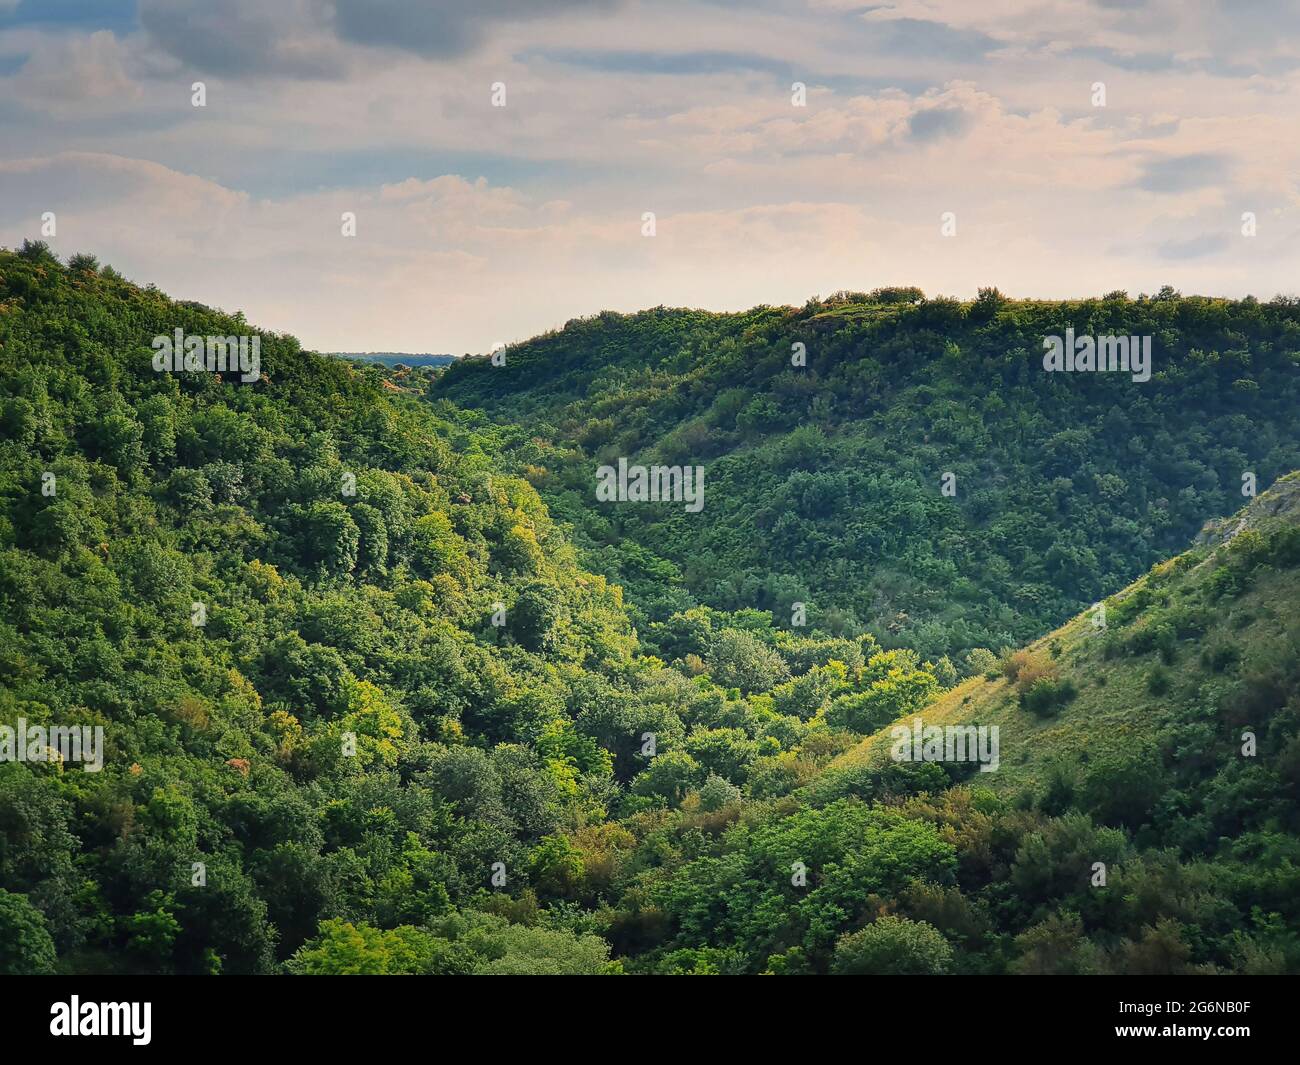 Picturesque view to the green forest on the hills. Idyllic summer landscape scene. Environment and nature conservation concept. Fresh air of the woodl Stock Photo